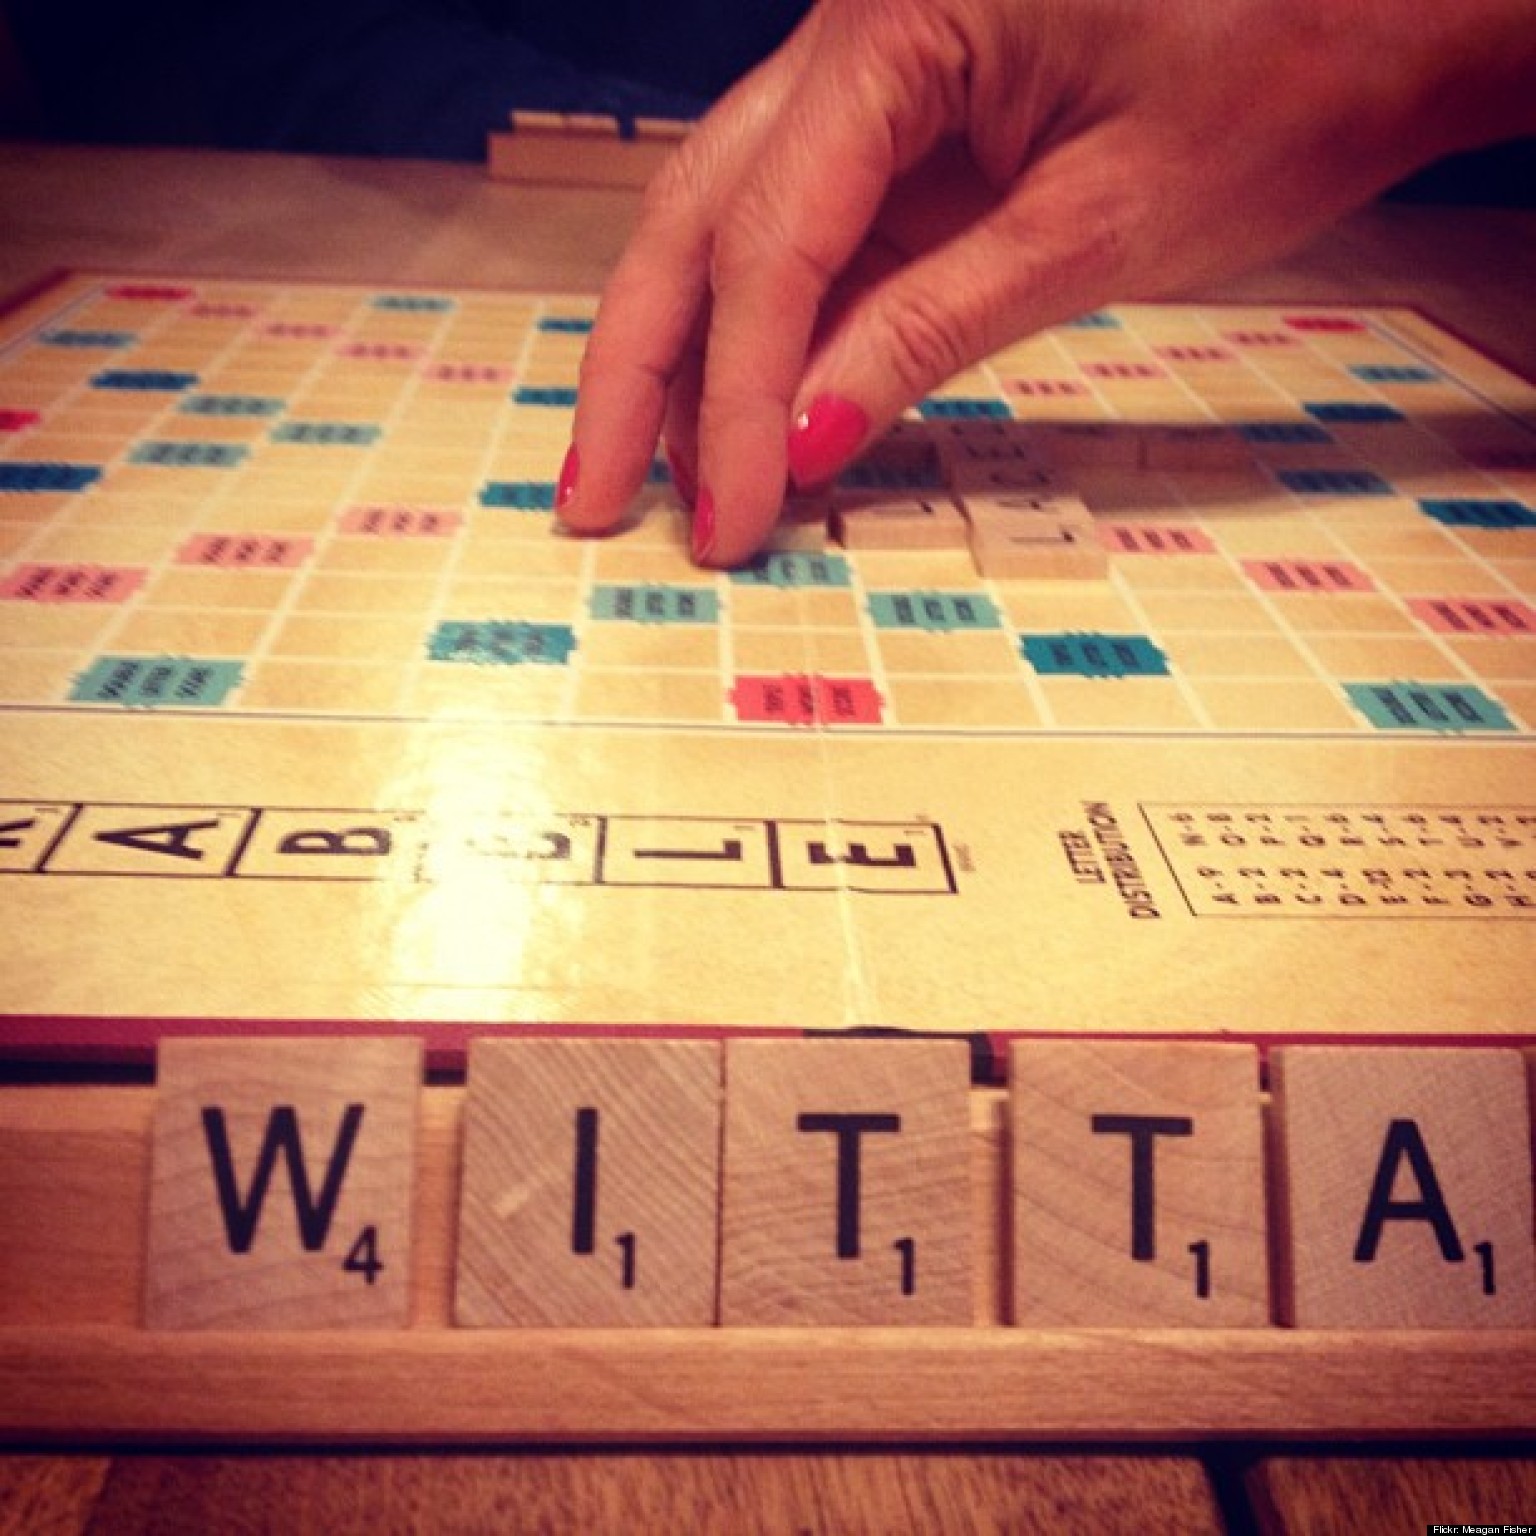 scrabble-letter-values-all-wrong-especially-z-researcher-says-huffpost